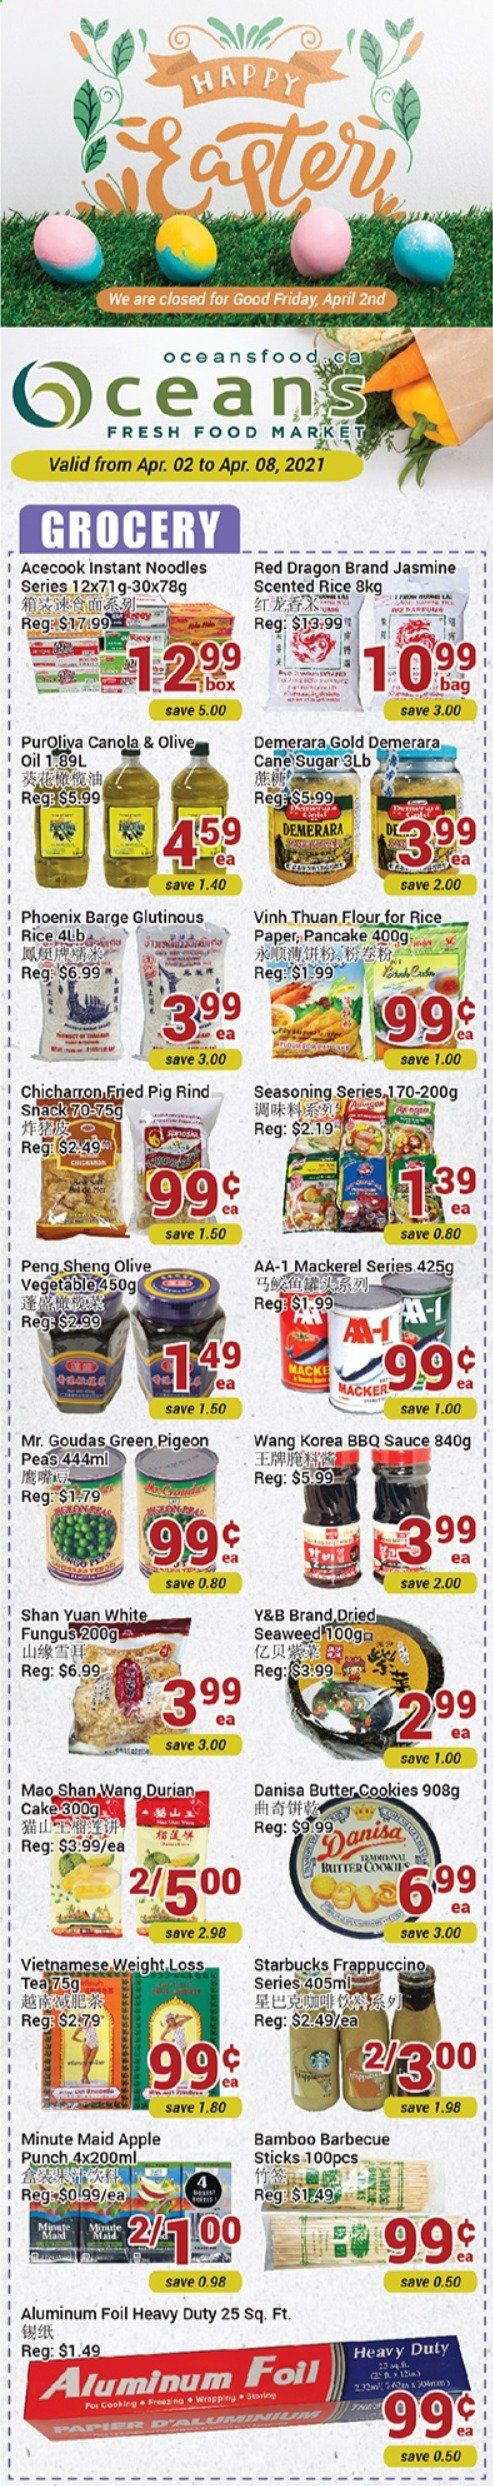 thumbnail - Oceans Flyer - April 02, 2021 - April 08, 2021 - Sales products - cake, peas, mackerel, instant noodles, sauce, pancakes, noodles, cookies, butter cookies, snack, cane sugar, demerara sugar, flour, sugar, seaweed, rice, toor dal, spice, BBQ sauce, olive oil, fruit punch, tea, Starbucks, frappuccino, bag. Page 1.